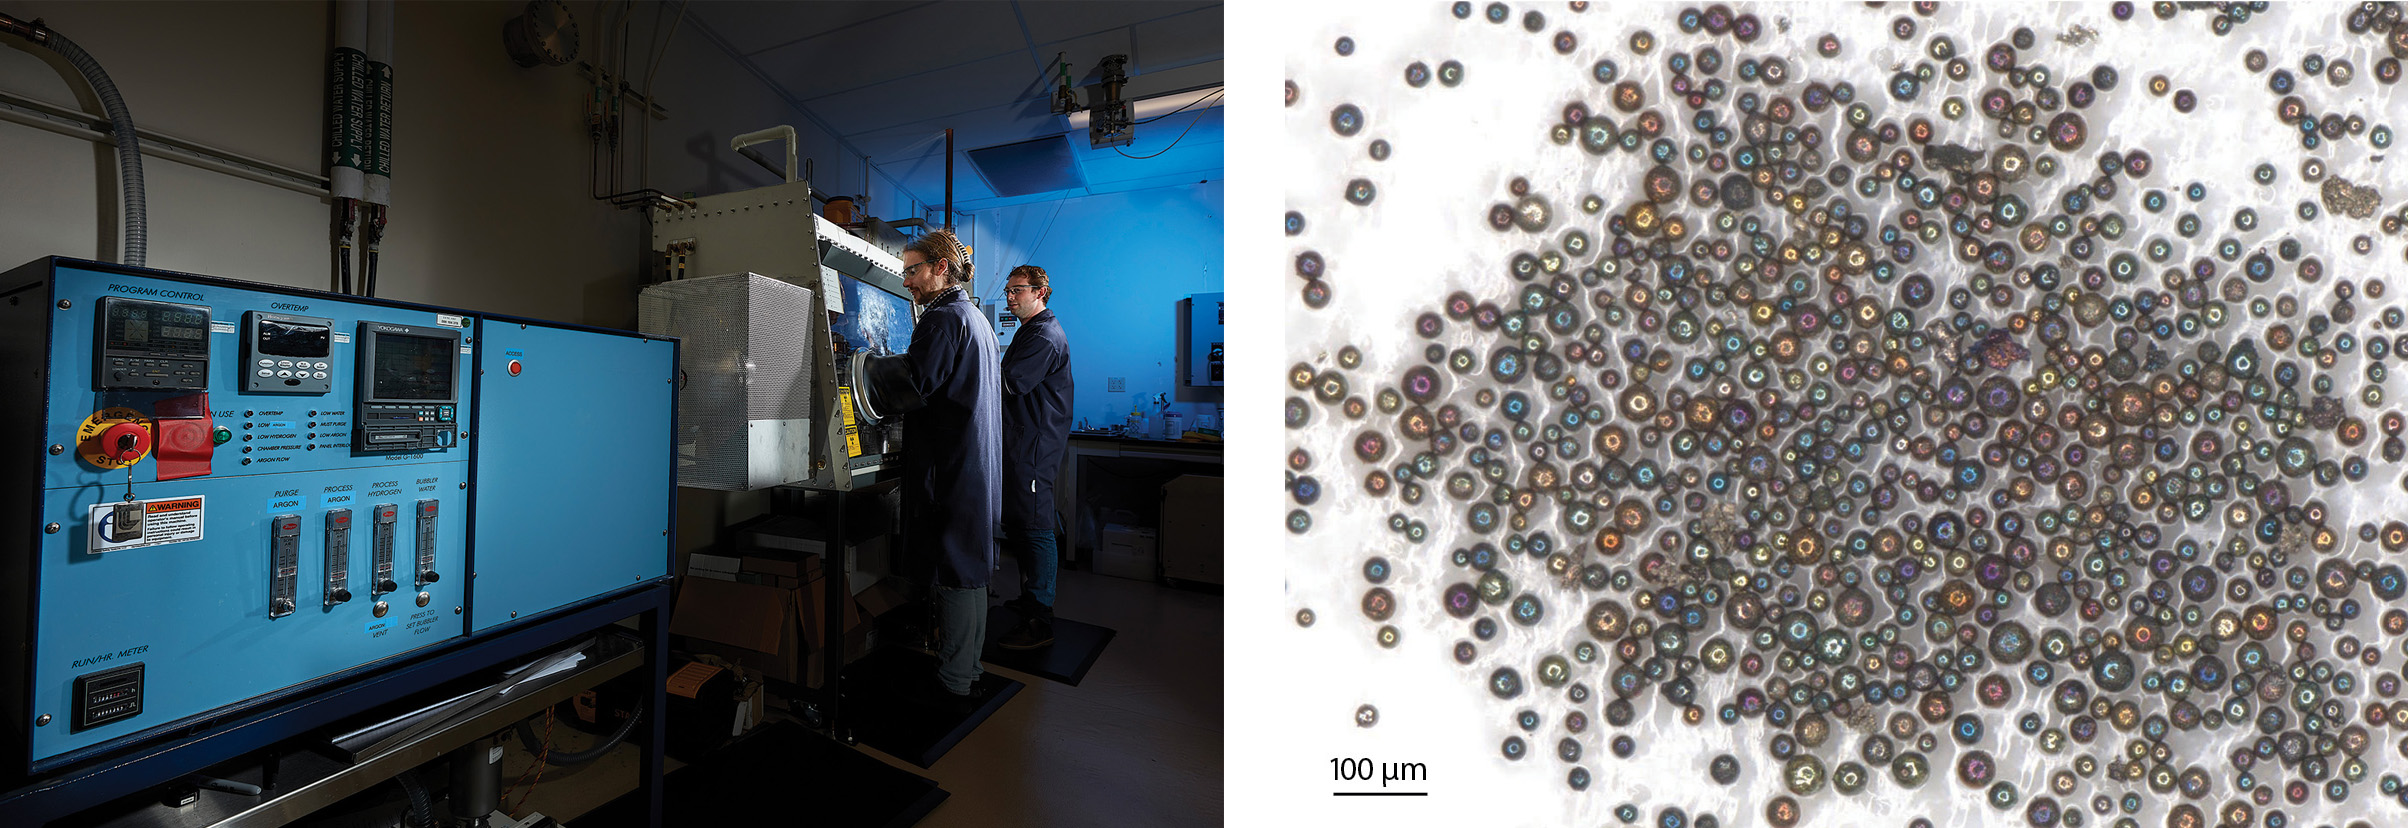 Left: Two scientists working with equipment in a laboratory; Right: small, spherical objects